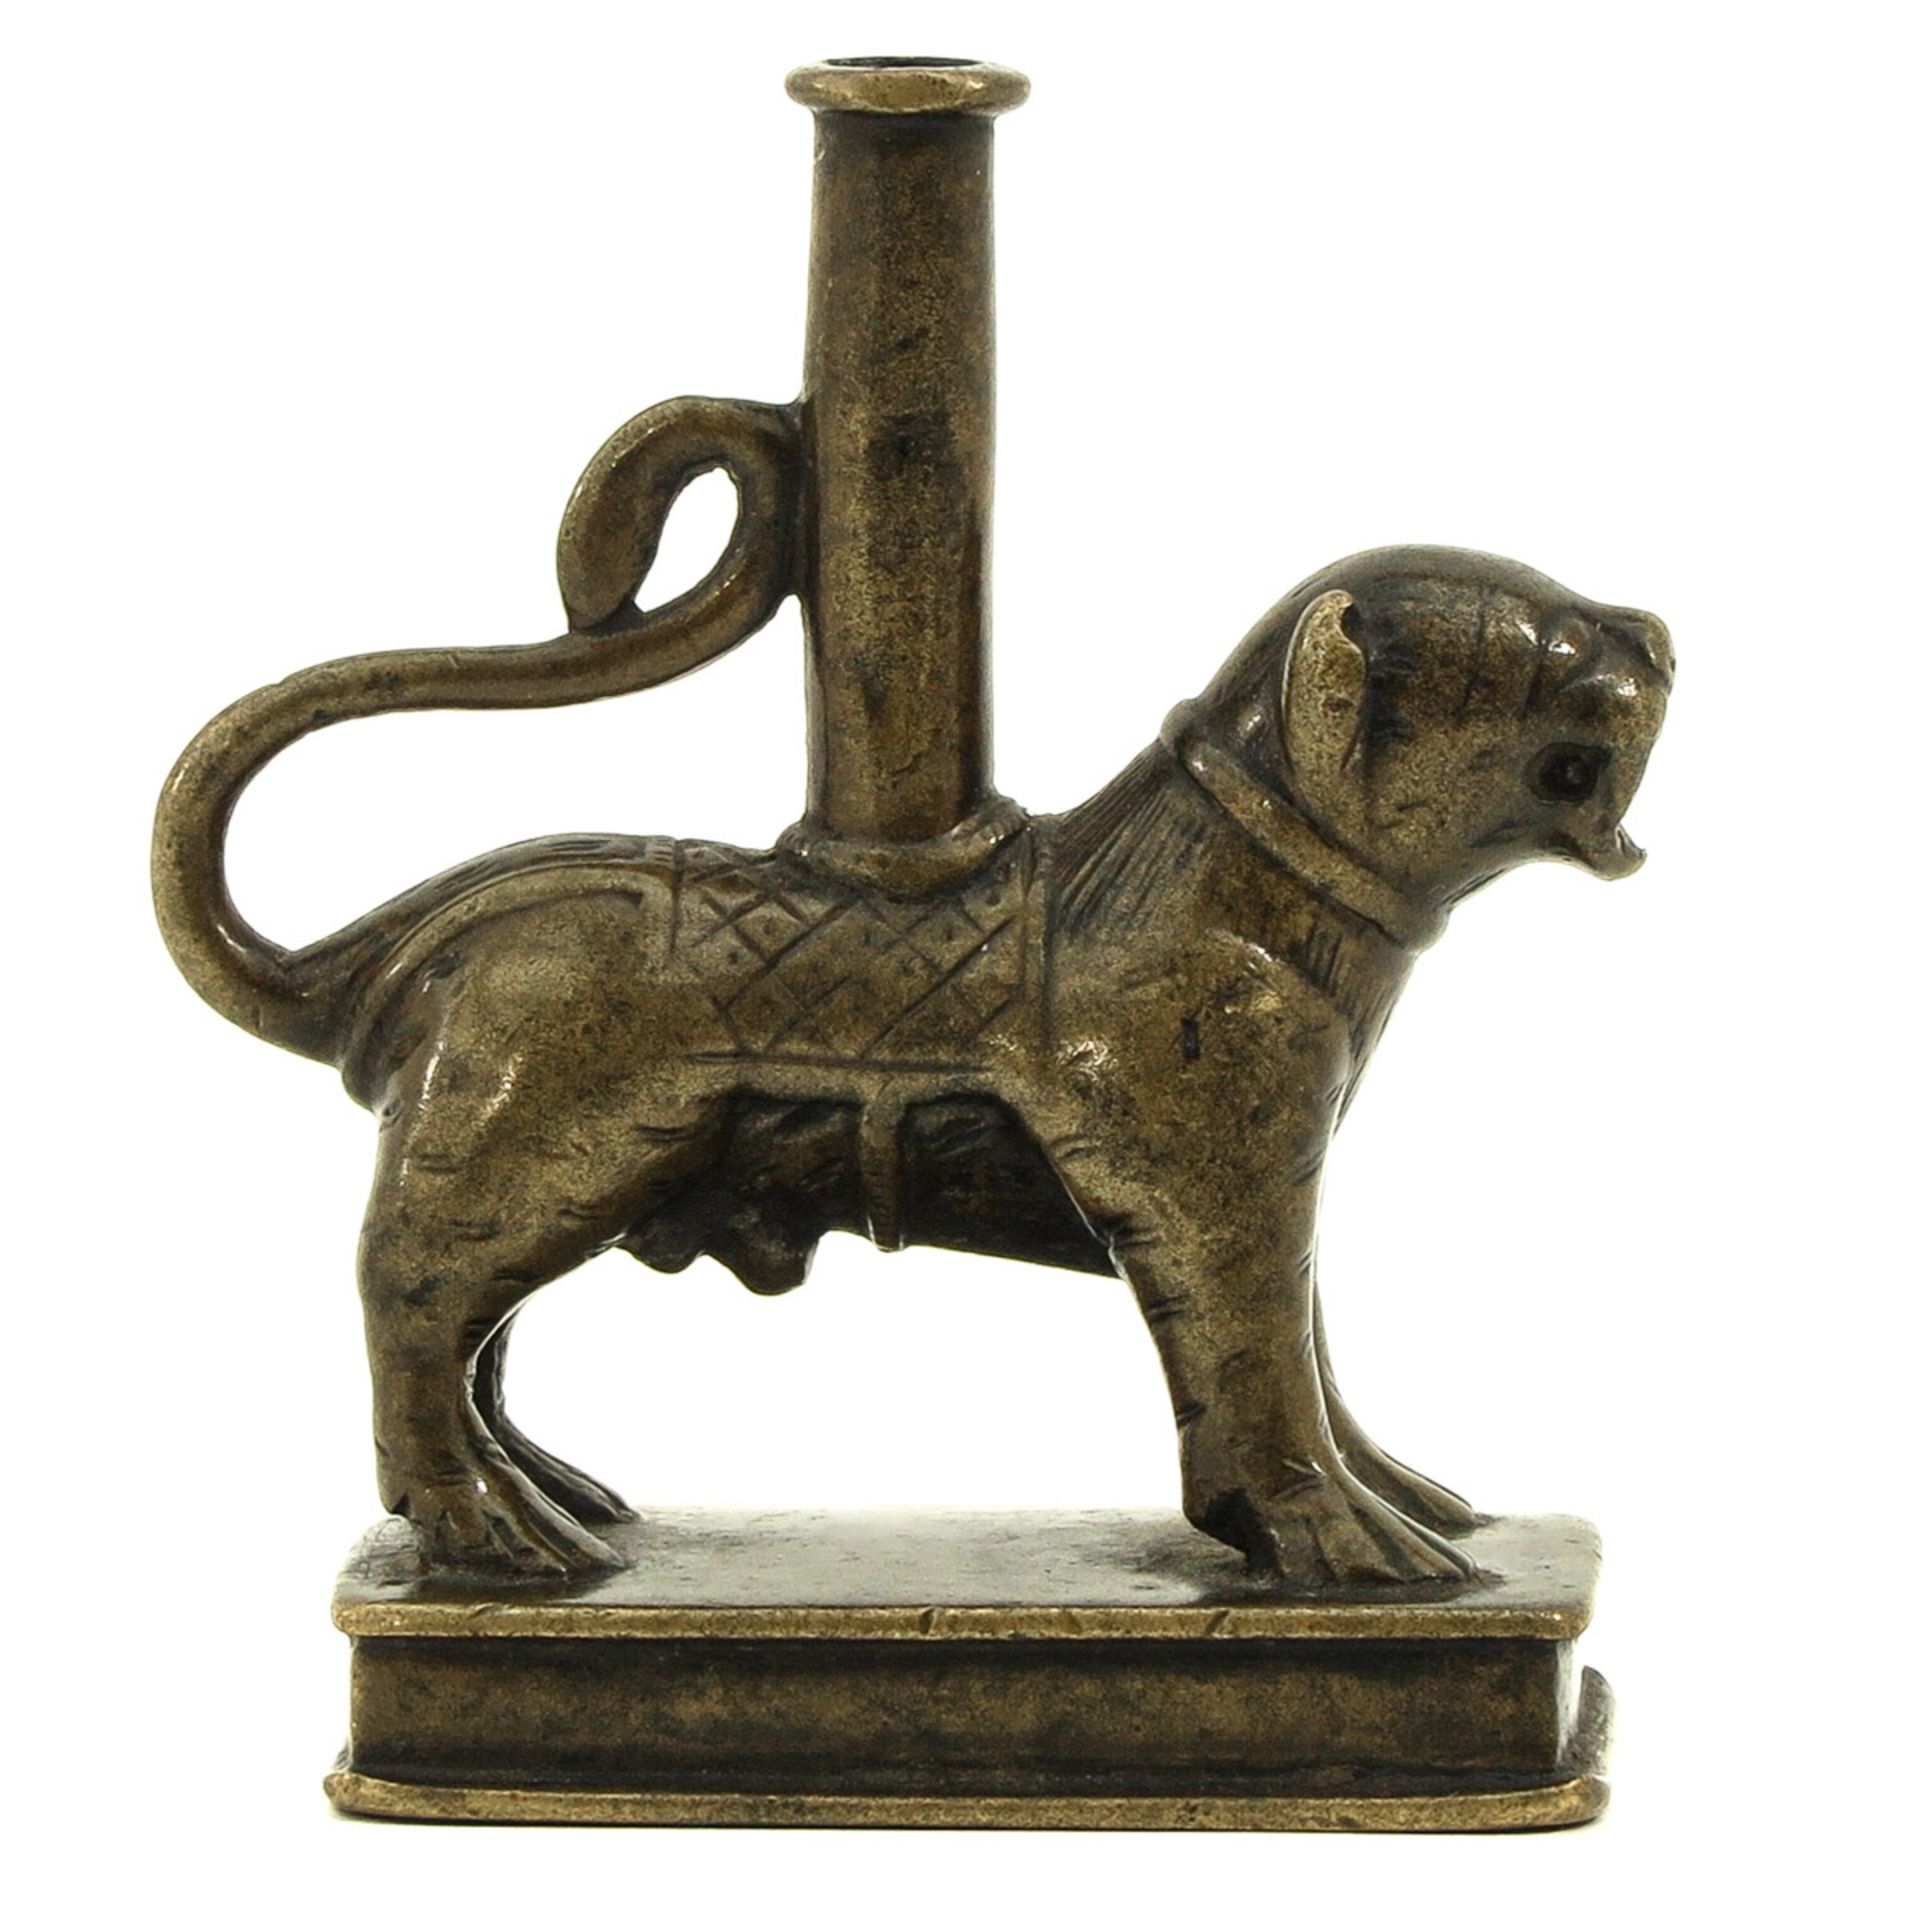 A 16th Century Candlestick - Image 4 of 8